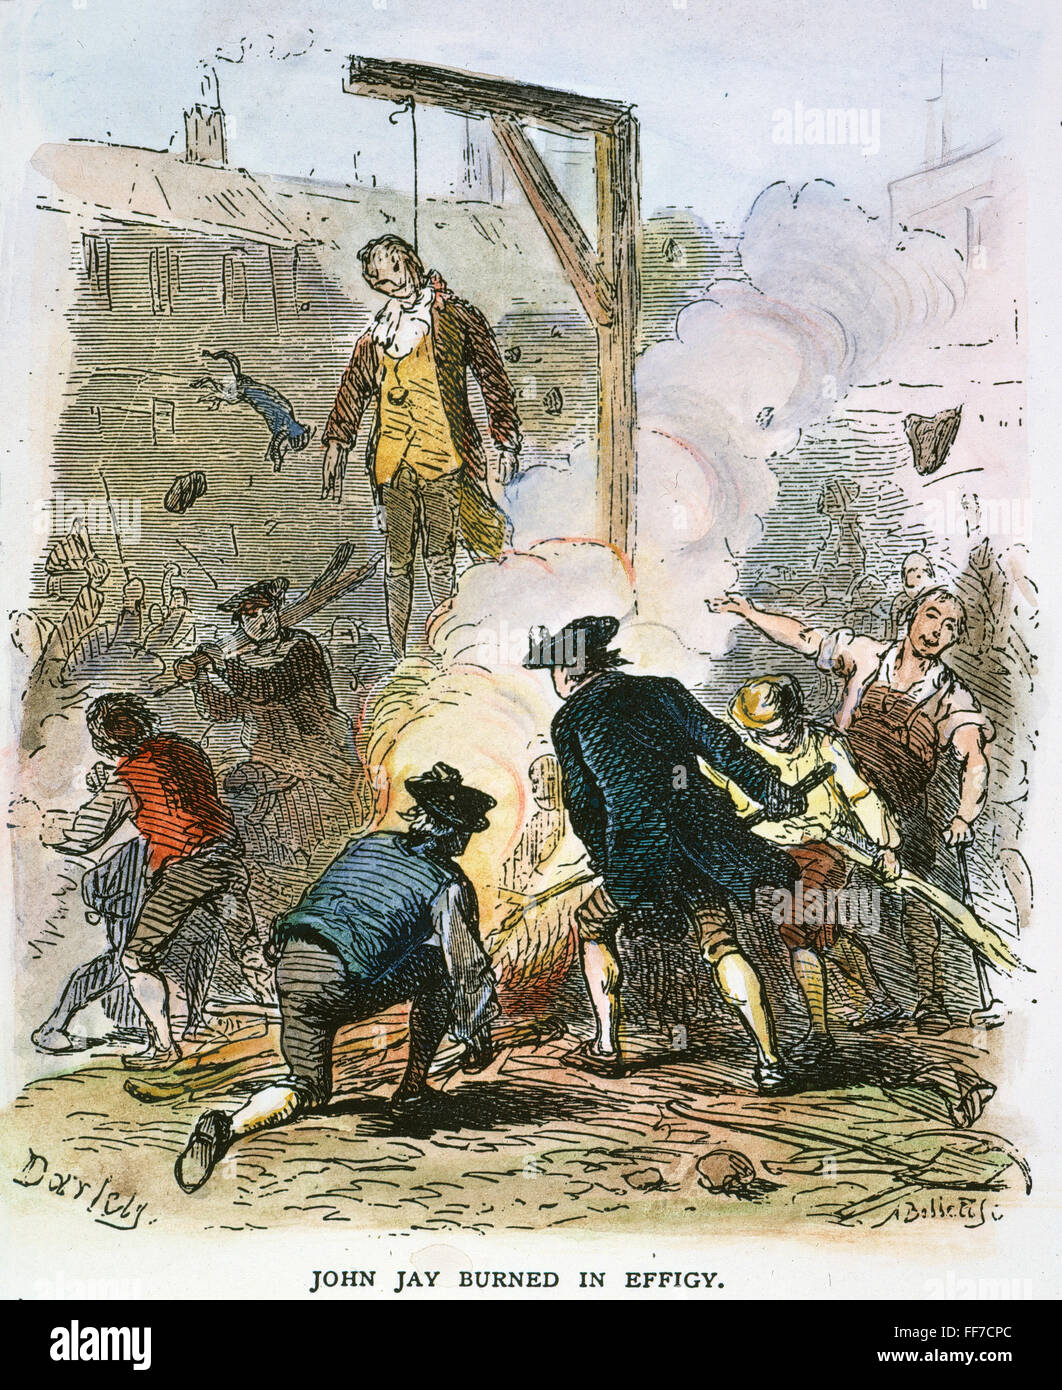 JOHN JAY: EFFIGY, 1794. /nJeffersonians hanging and burning John Jay in effigy in 1794. Colored engraving, 19th century. Stock Photo